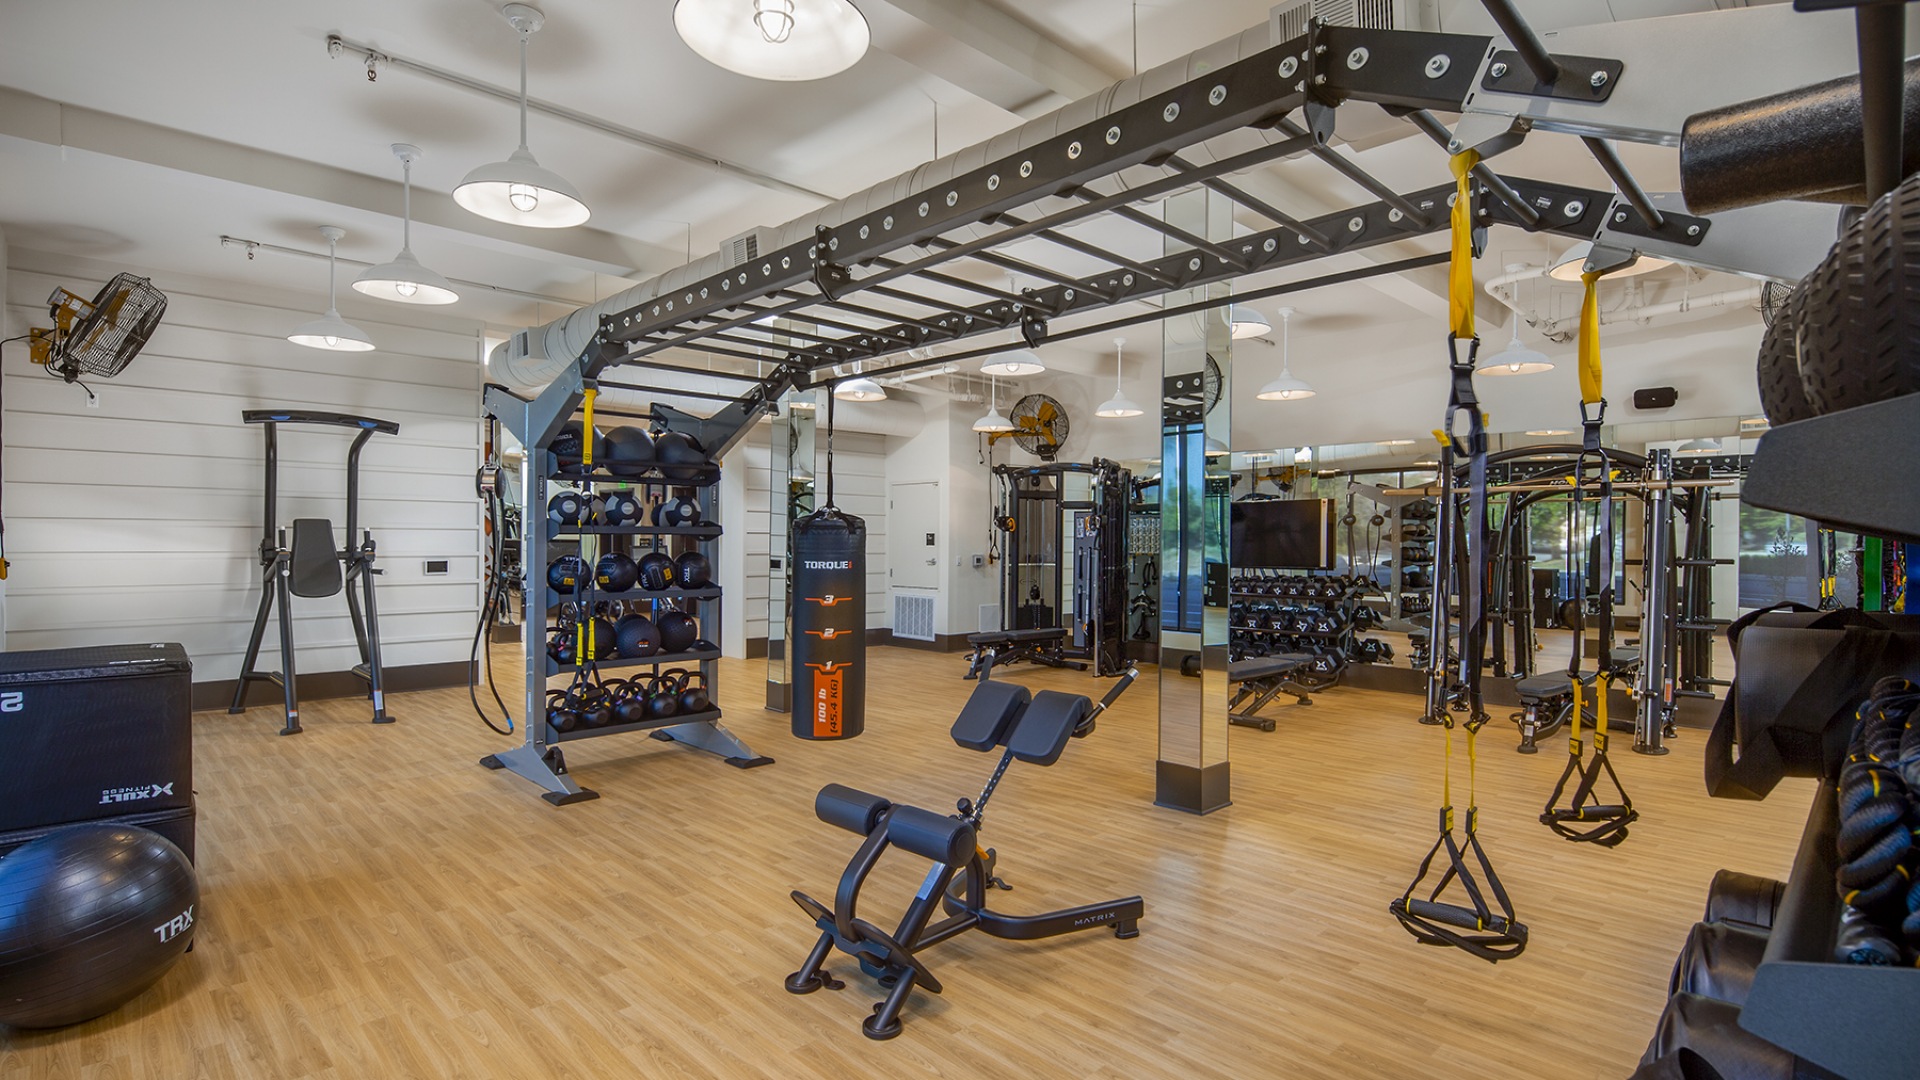 Fitness Center weights and equipment